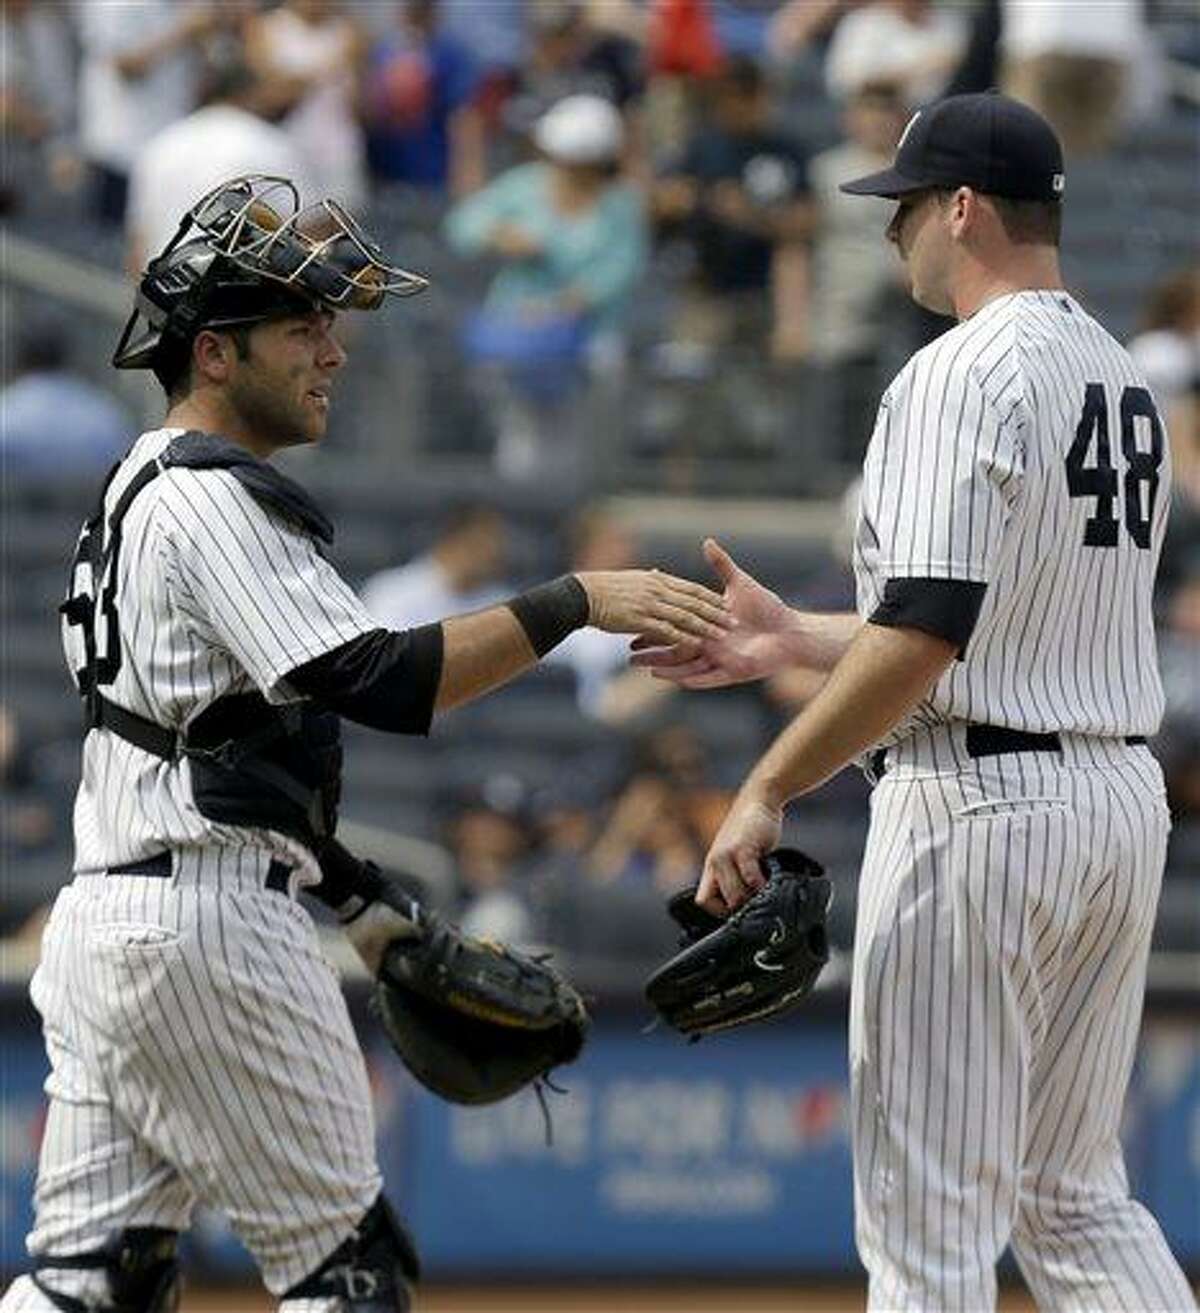 New York Yankees catcher Austin Romine, left, shakes hands with relief pitcher Boone Logan after defeating the Kansas City Royals in a baseball game at Yankee Stadium, Thursday, July 11, 2013, in New York. The Yankees won 8-4. (AP Photo/Seth Wenig)